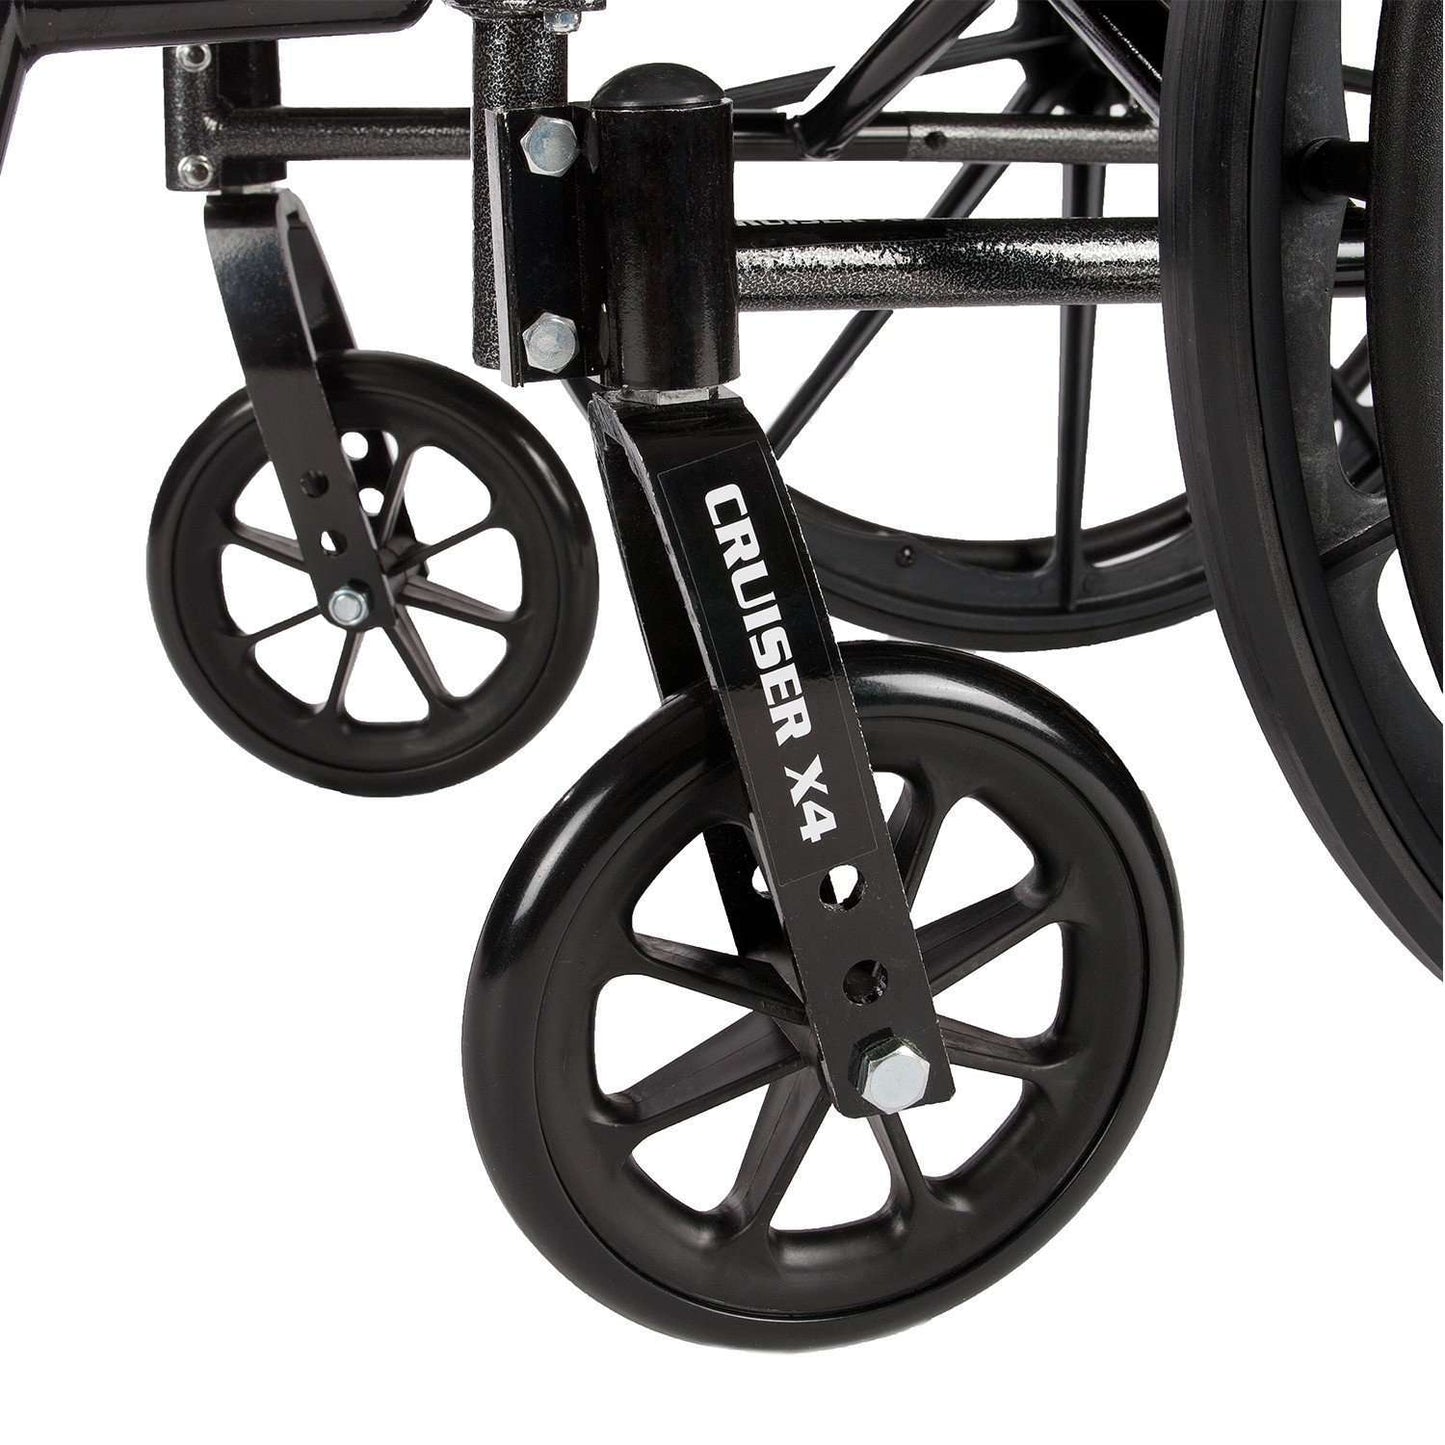 Drive cx418adda-sf Cruiser X4 Lightweight Dual Axle Wheelchair with Adjustable Detachable Arms, Desk Arms, Swing Away Footrests, 18" Seat